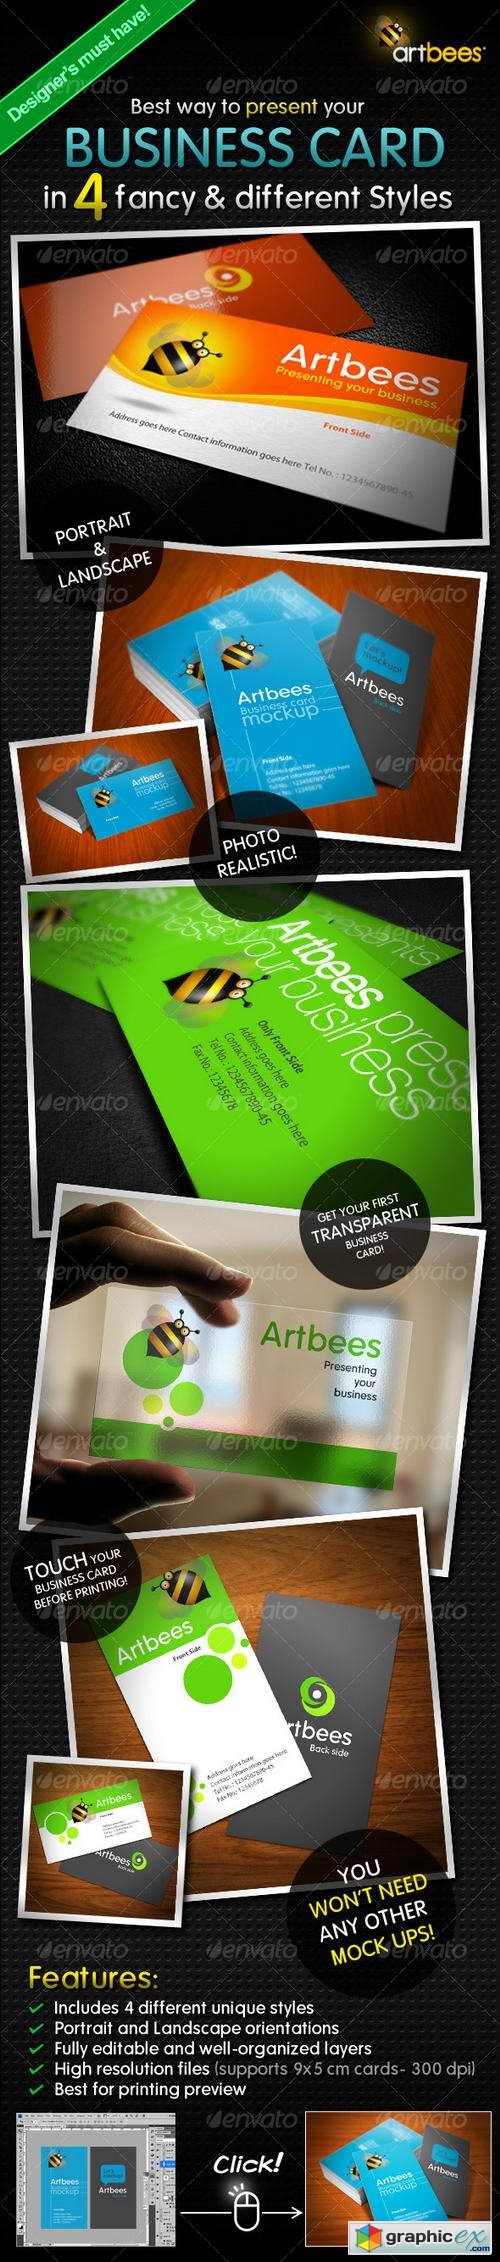 Great Business Card Mock-up Pack - 4 Styles 114970